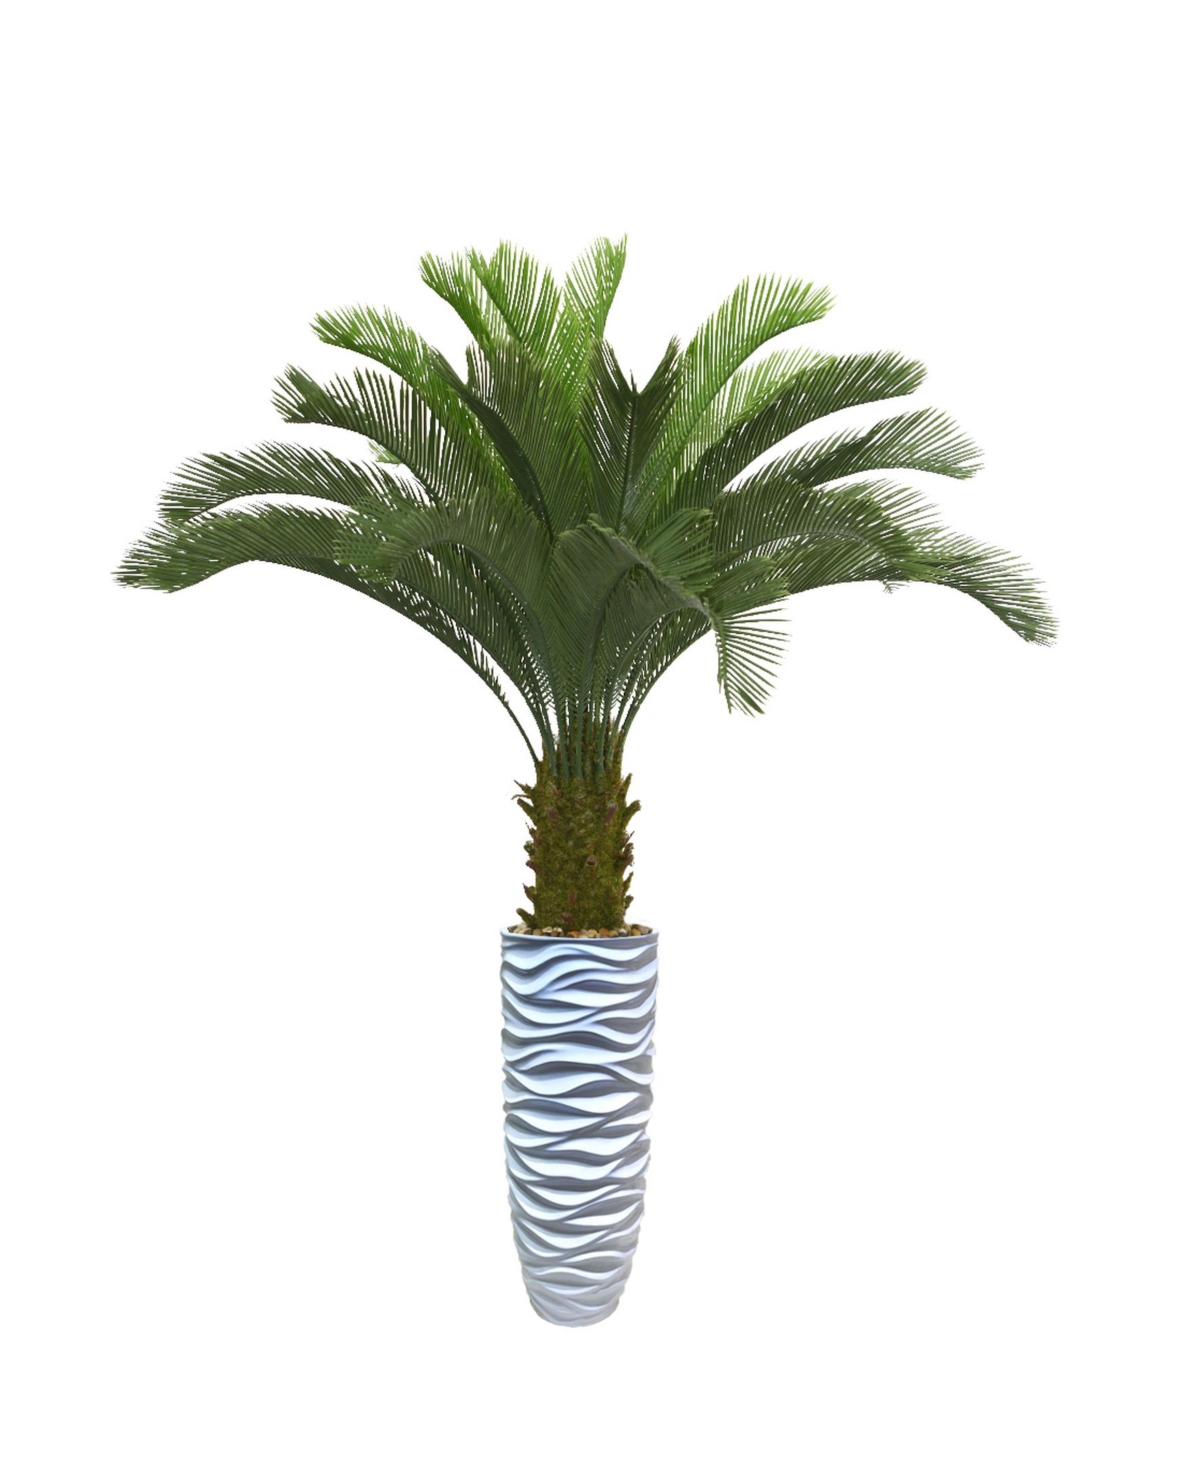 70" Palm Tree Artificial Faux decor in Resin Planter - White